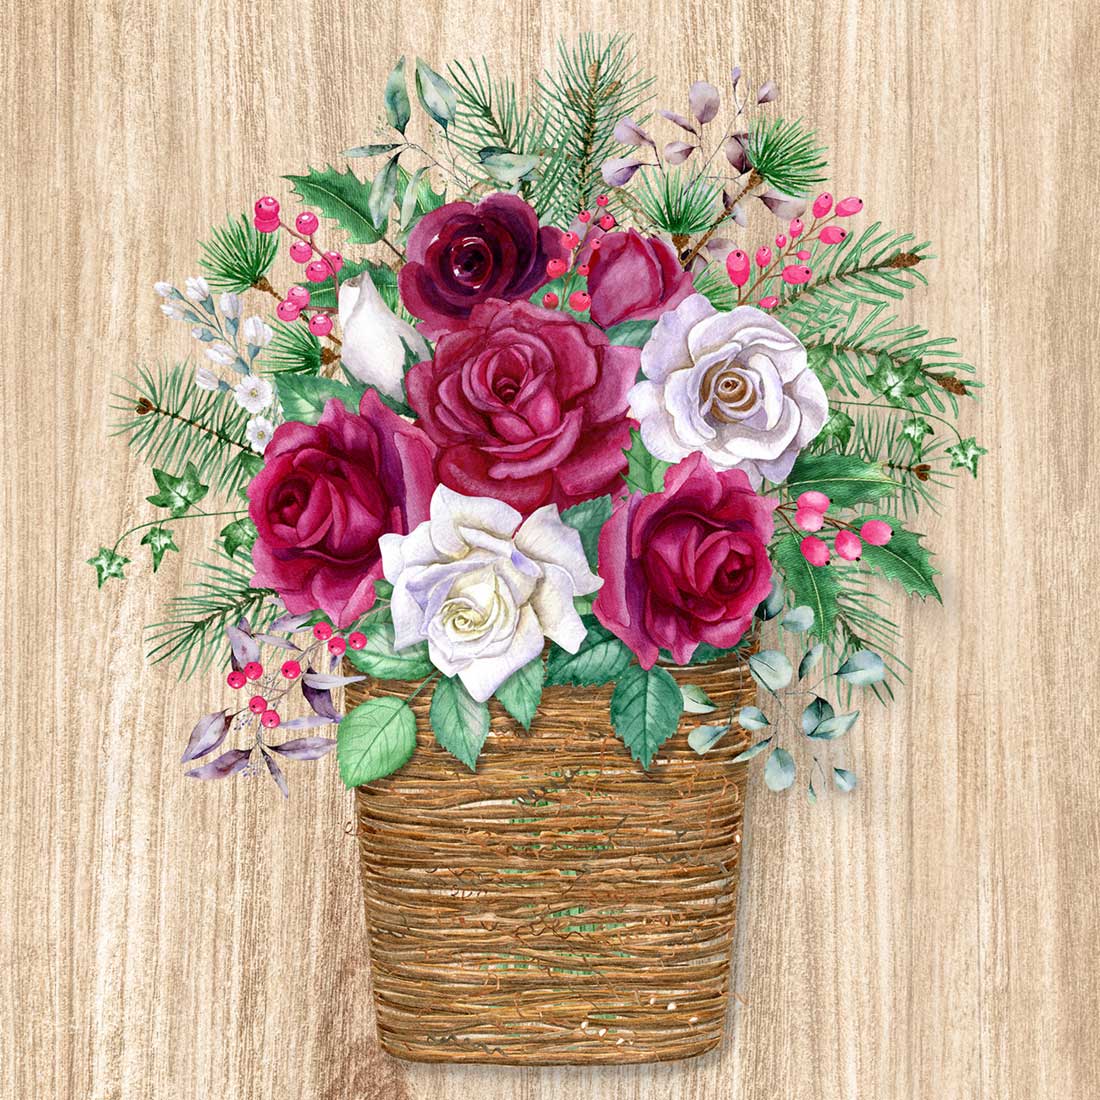 A bouquet of flowers with greenery on a wooden background.